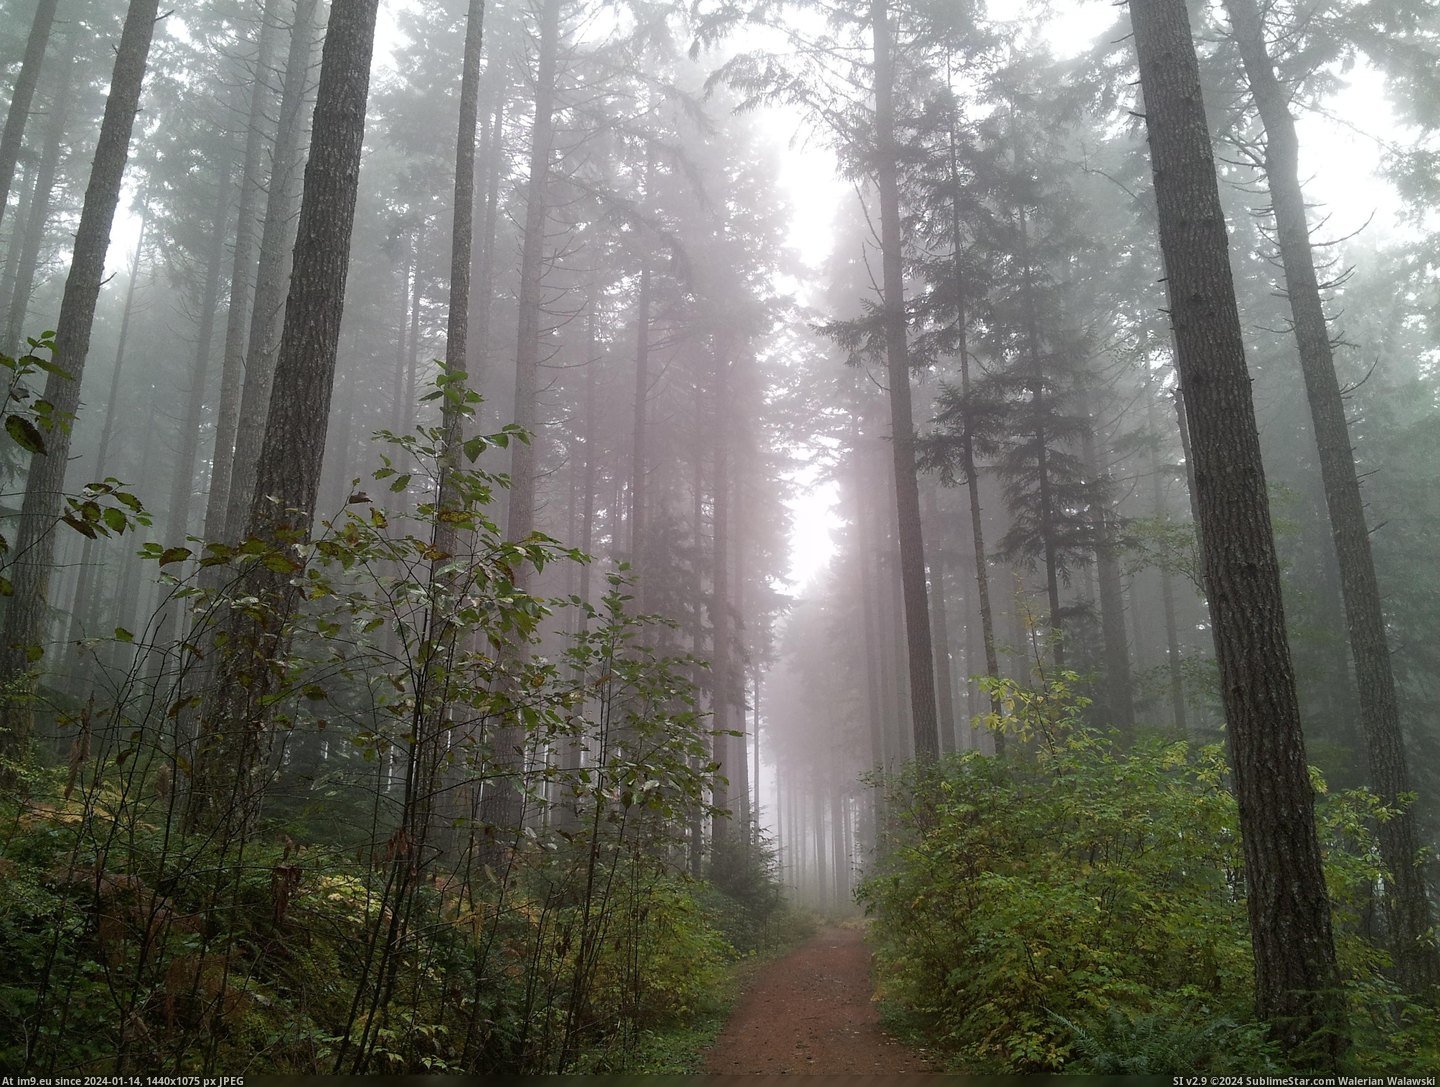 #Photo #Day #Wallpaper #Trees #Fog #Foggy #Nanaimo #Forest #Road #3264x2448 [Earthporn] A foggy day along a forest road, Nanaimo, BC. [OC] [3264x2448] Pic. (Obraz z album My r/EARTHPORN favs))